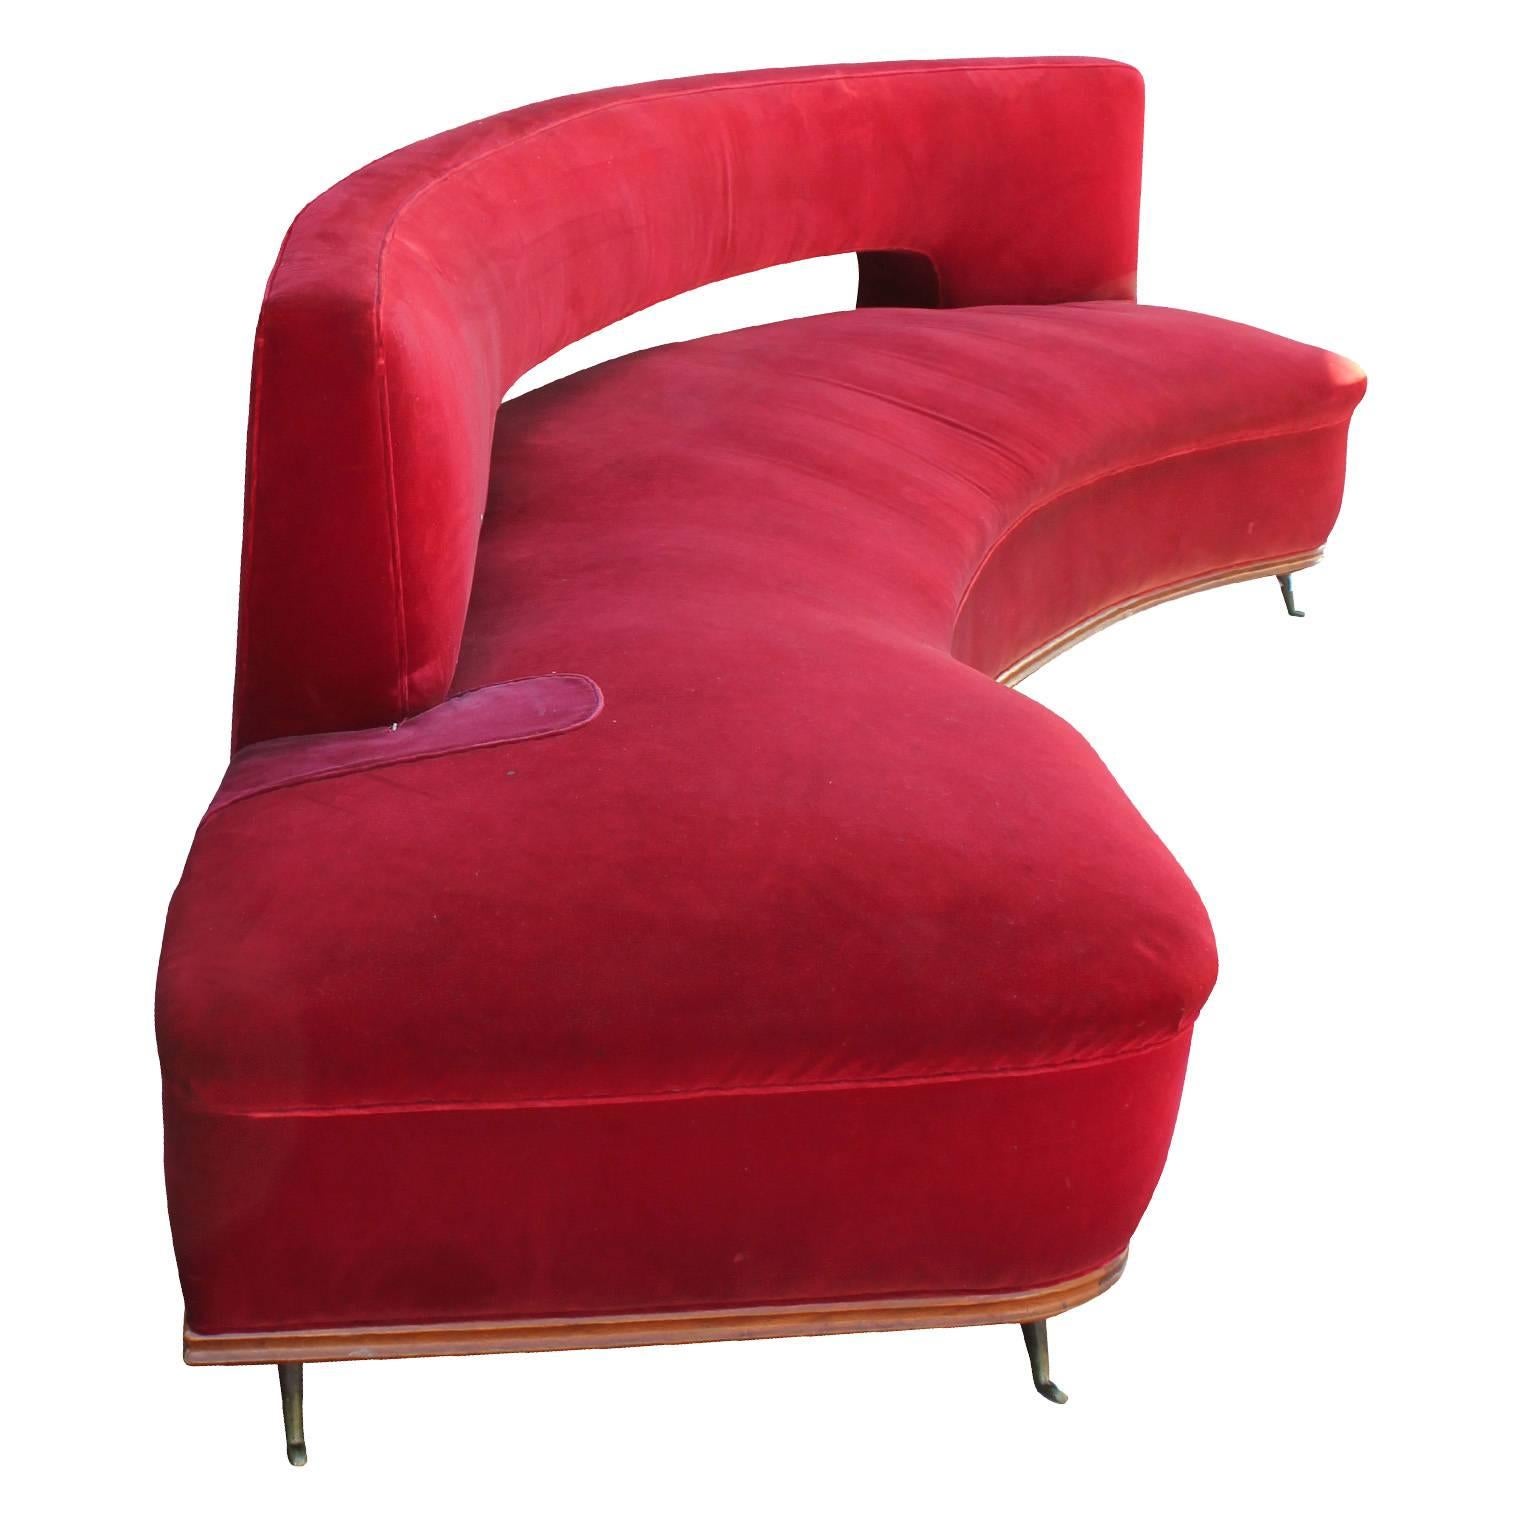 red curved couch